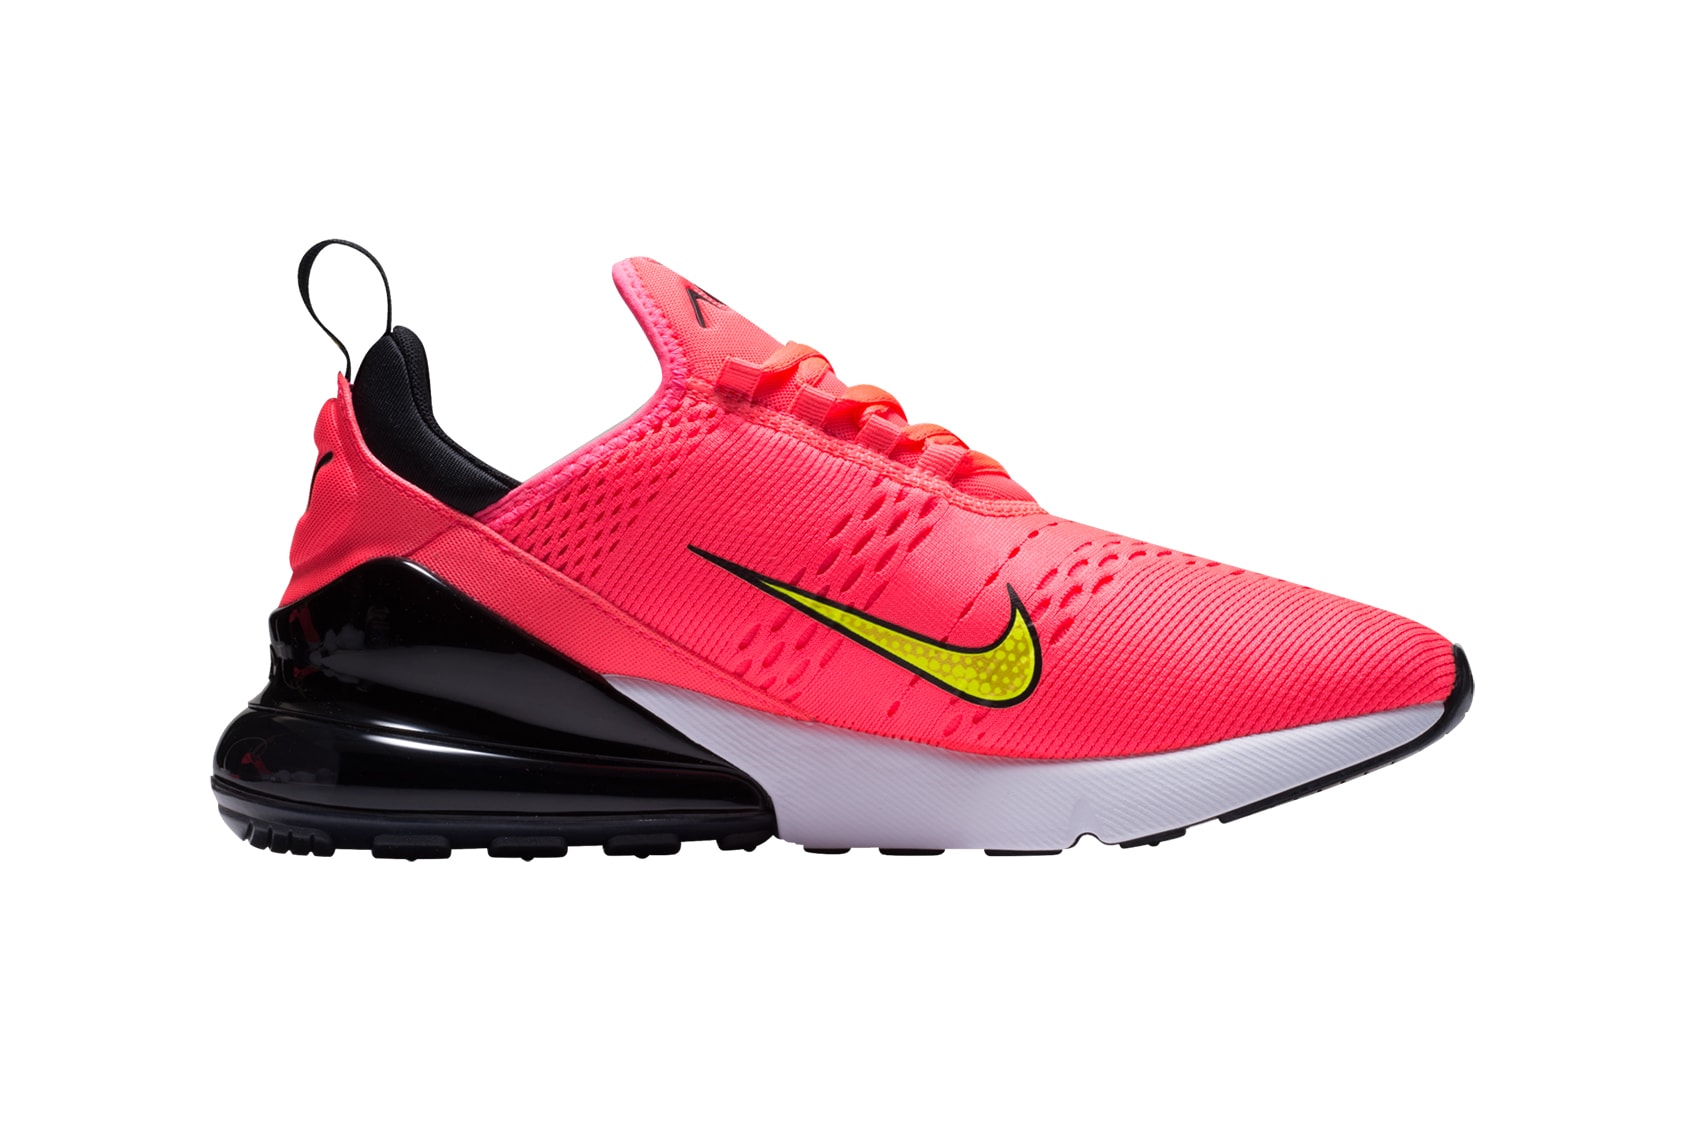 Nike Mercurial Air Max 270 Colorways Vapor Superfly Cristiano Ronaldo Football Boots Cleats Soccer Purple Orange Grey Volt Green 1998 World Cup Kim Jones Virgil Abloh Release Information Details How to Buy Cop Purchase